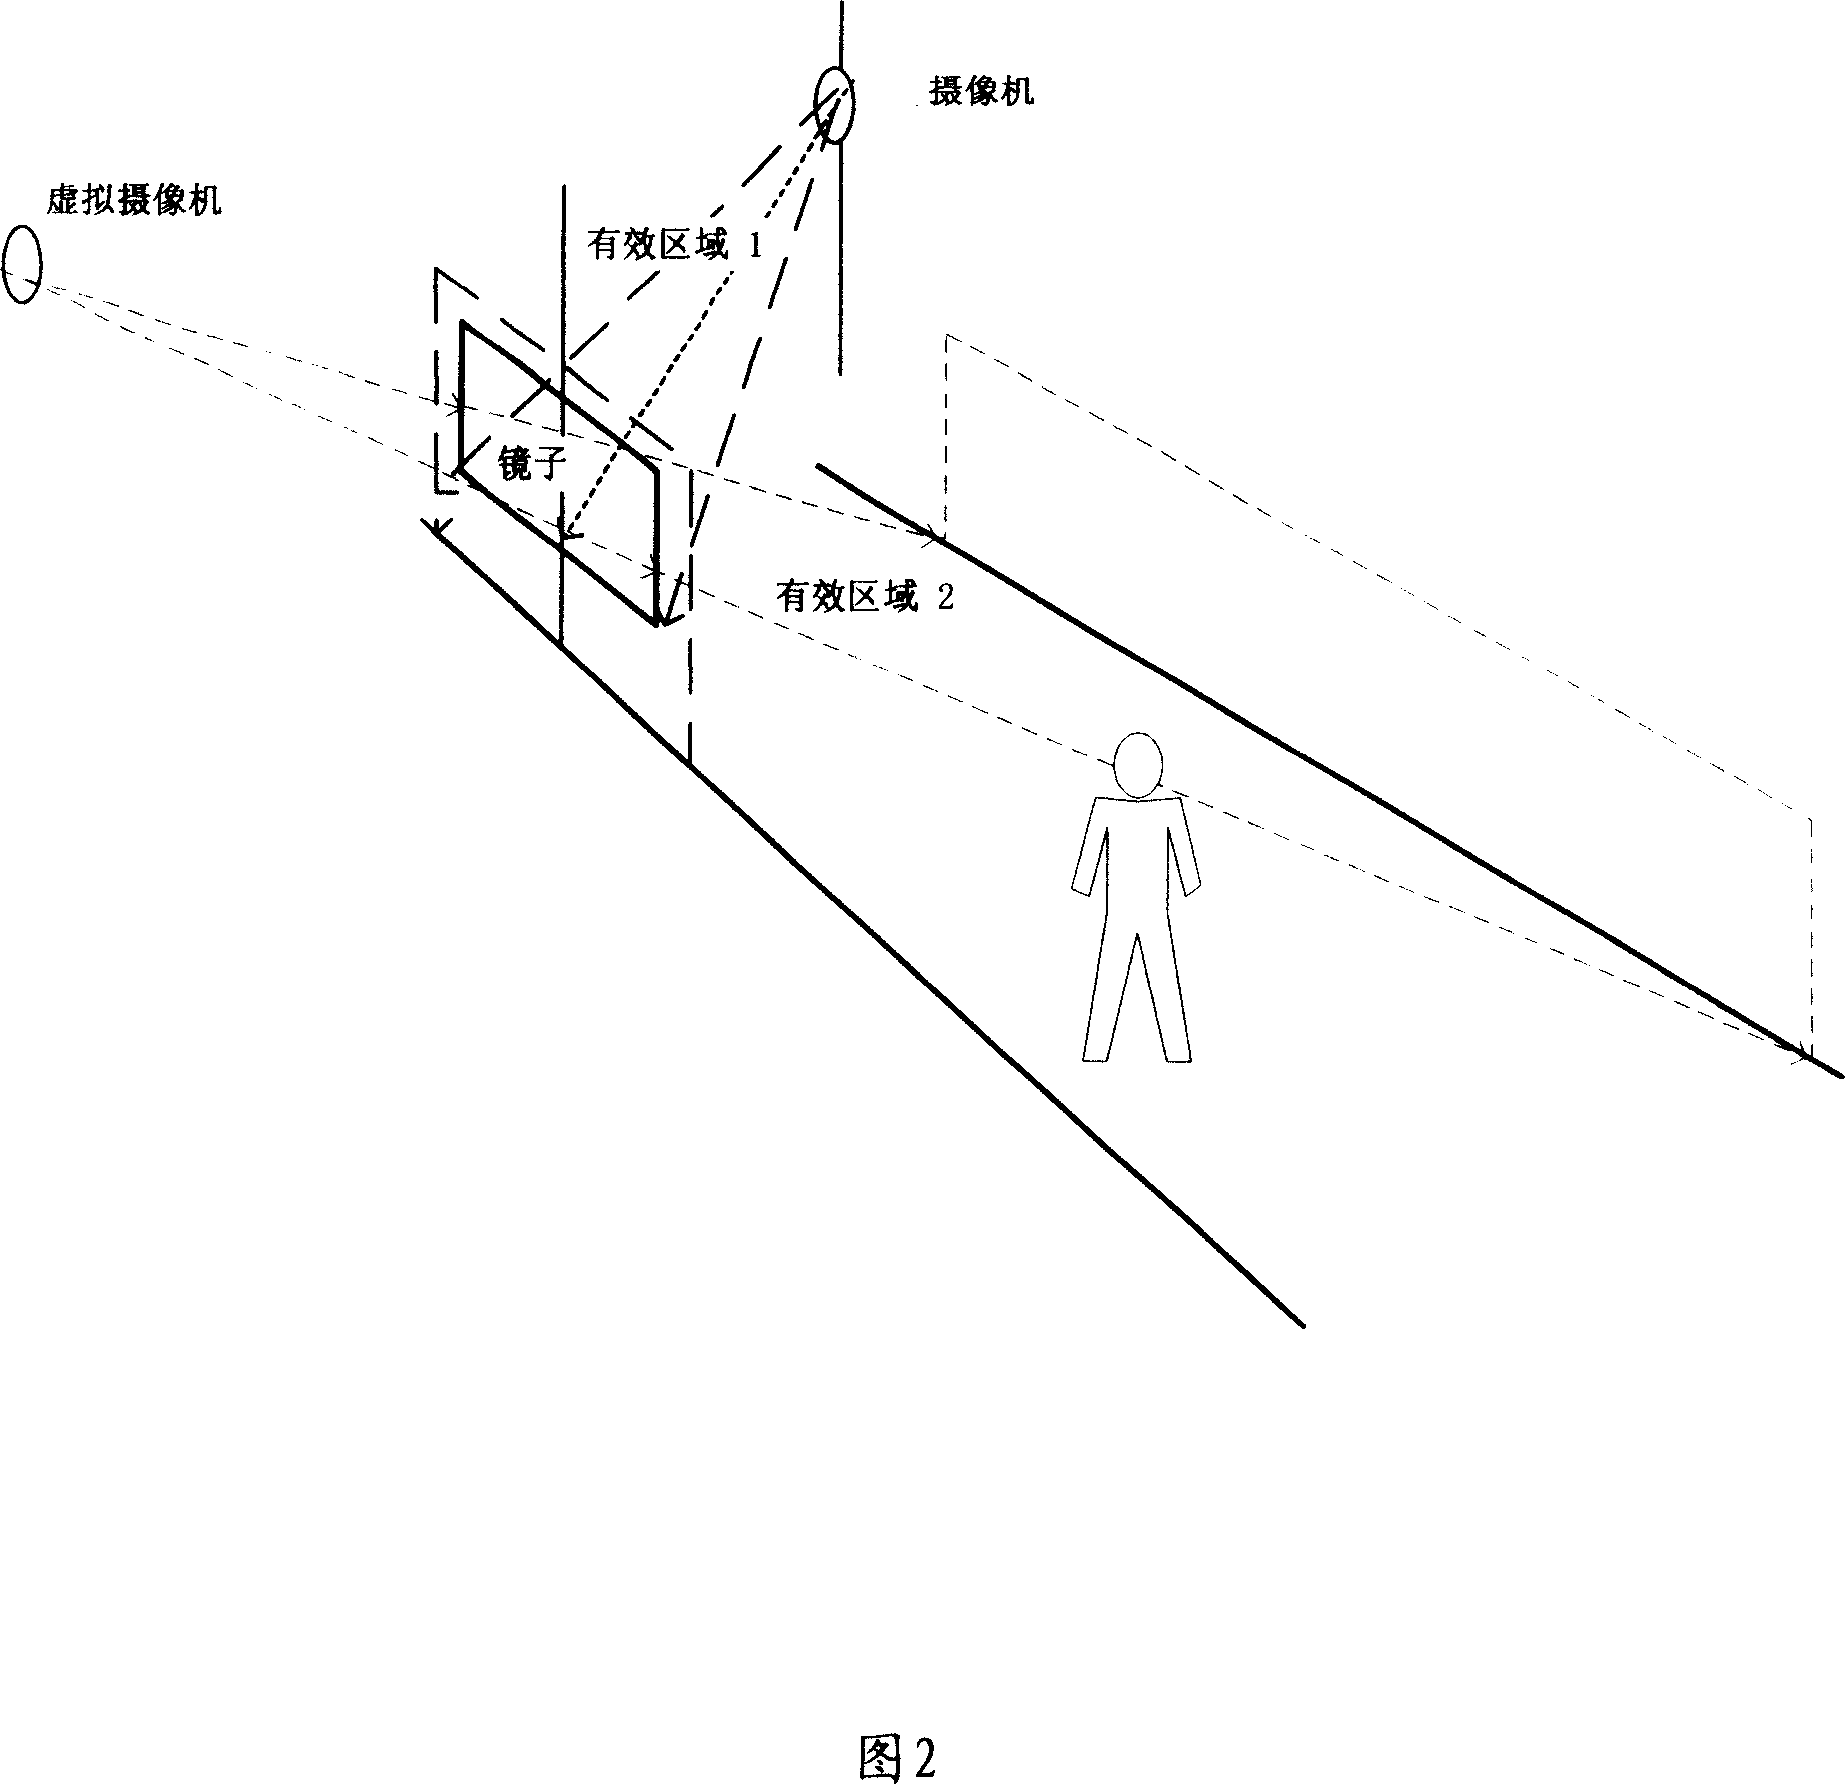 Image collecting method and its application